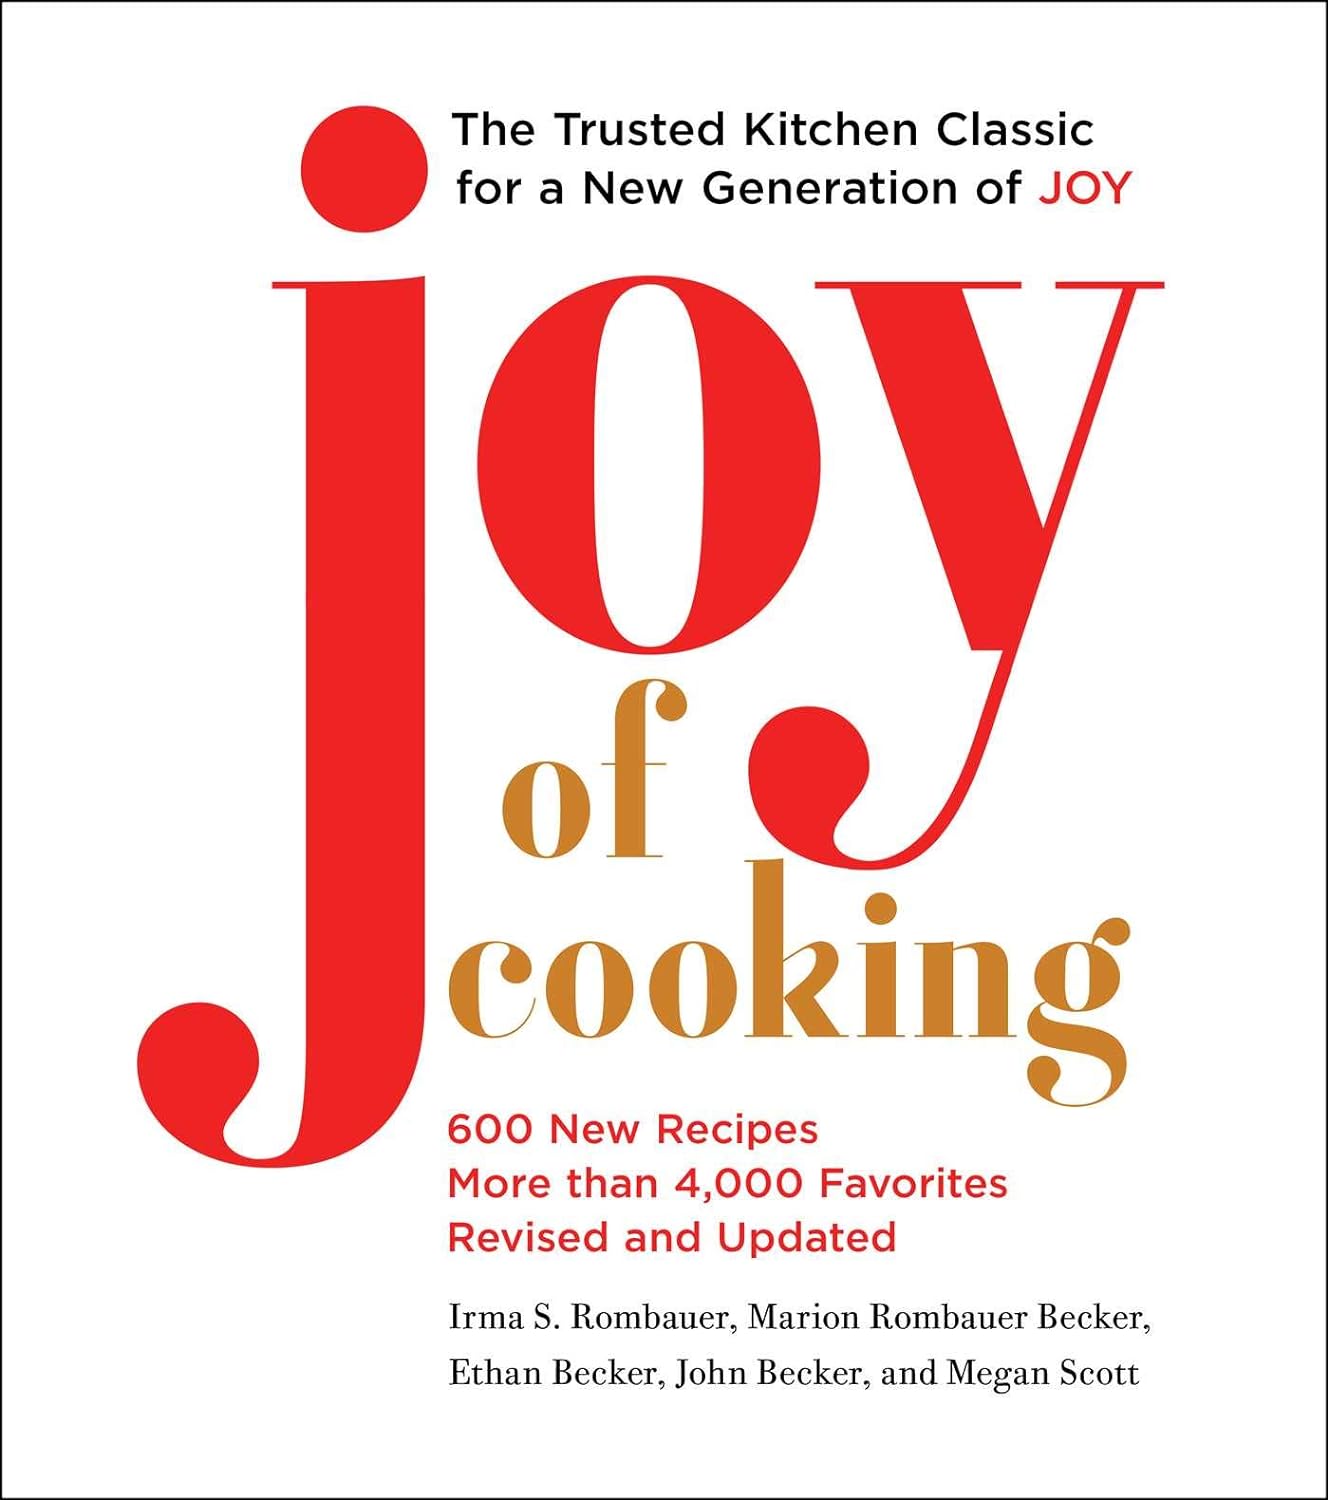 Joy of Cooking: 2019 Edition Fully Revised and Updated     Hardcover – Illustrated, 14 Nov. 2019